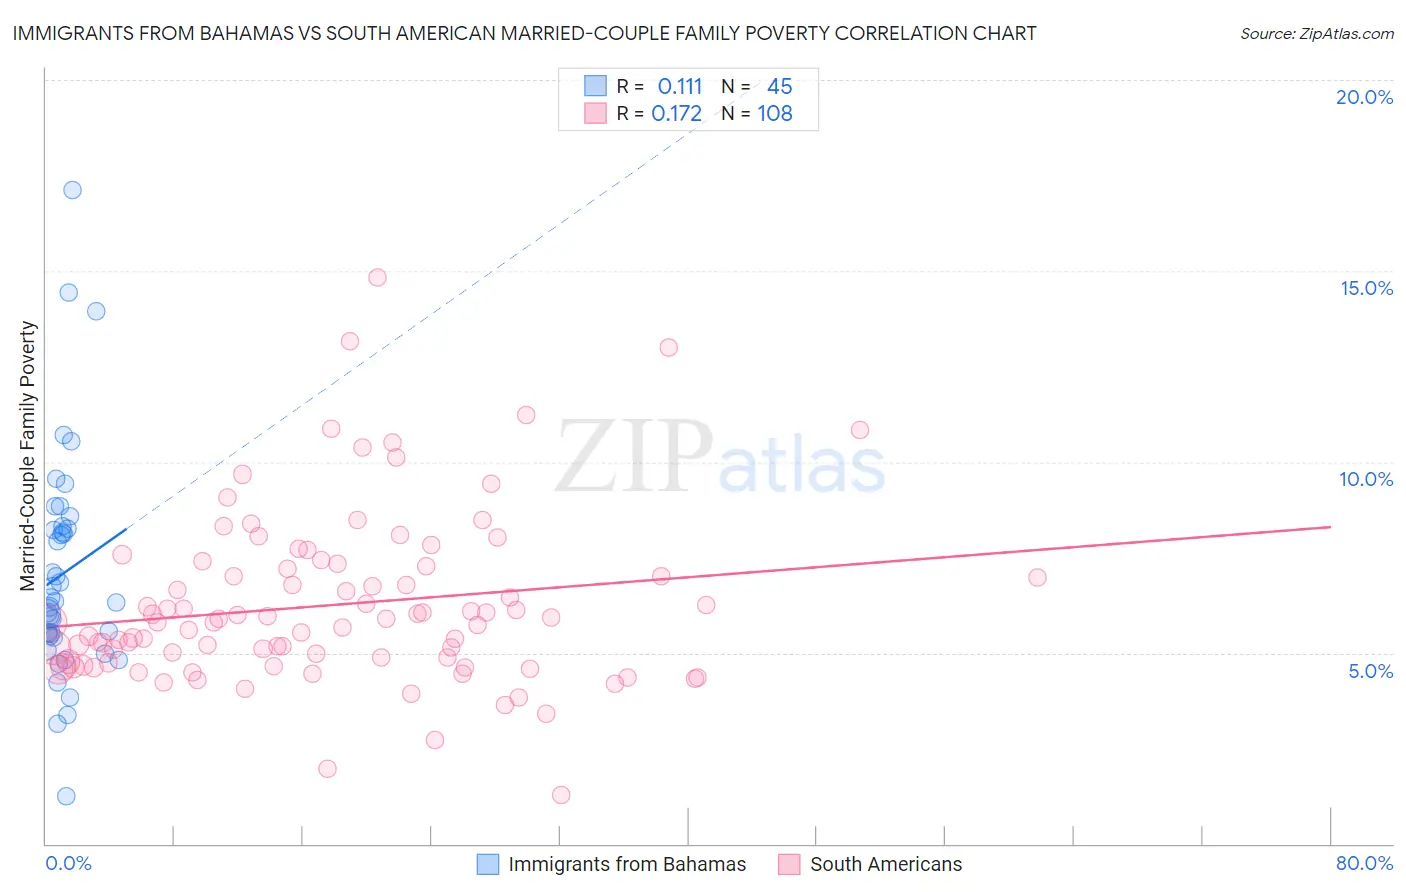 Immigrants from Bahamas vs South American Married-Couple Family Poverty